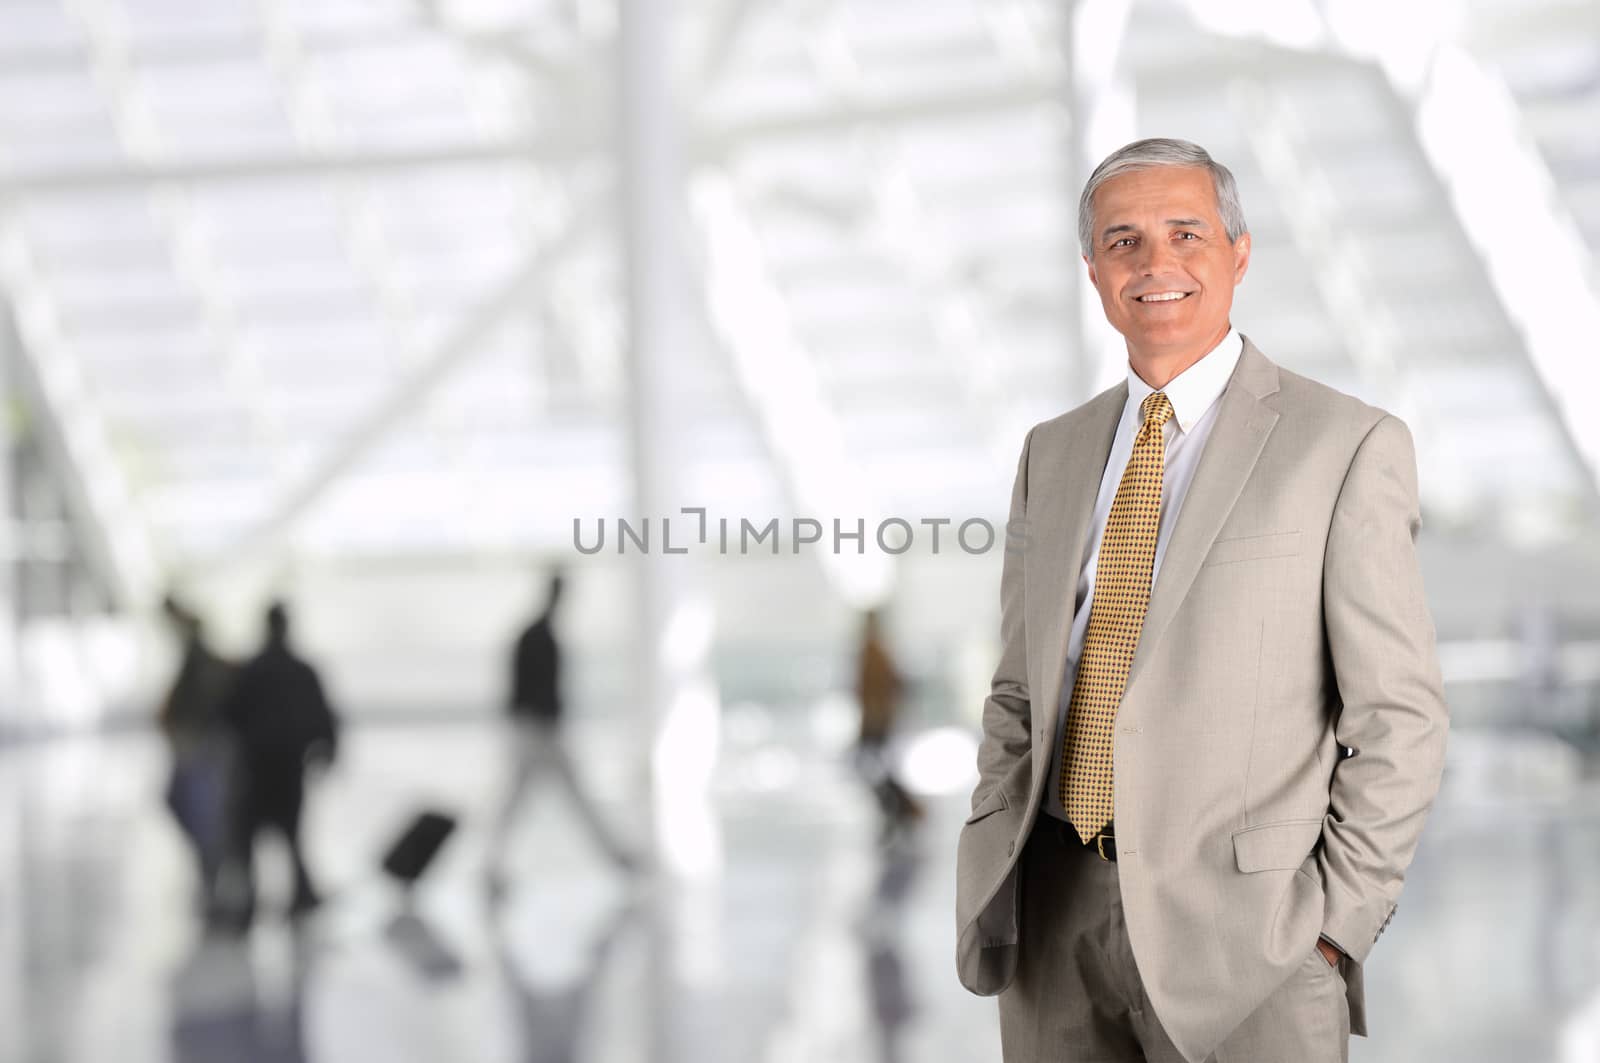 Mature businessman in airport concourse with blurred travellers in background. Man has hands in his pockets and is smiling. Horizontal Format